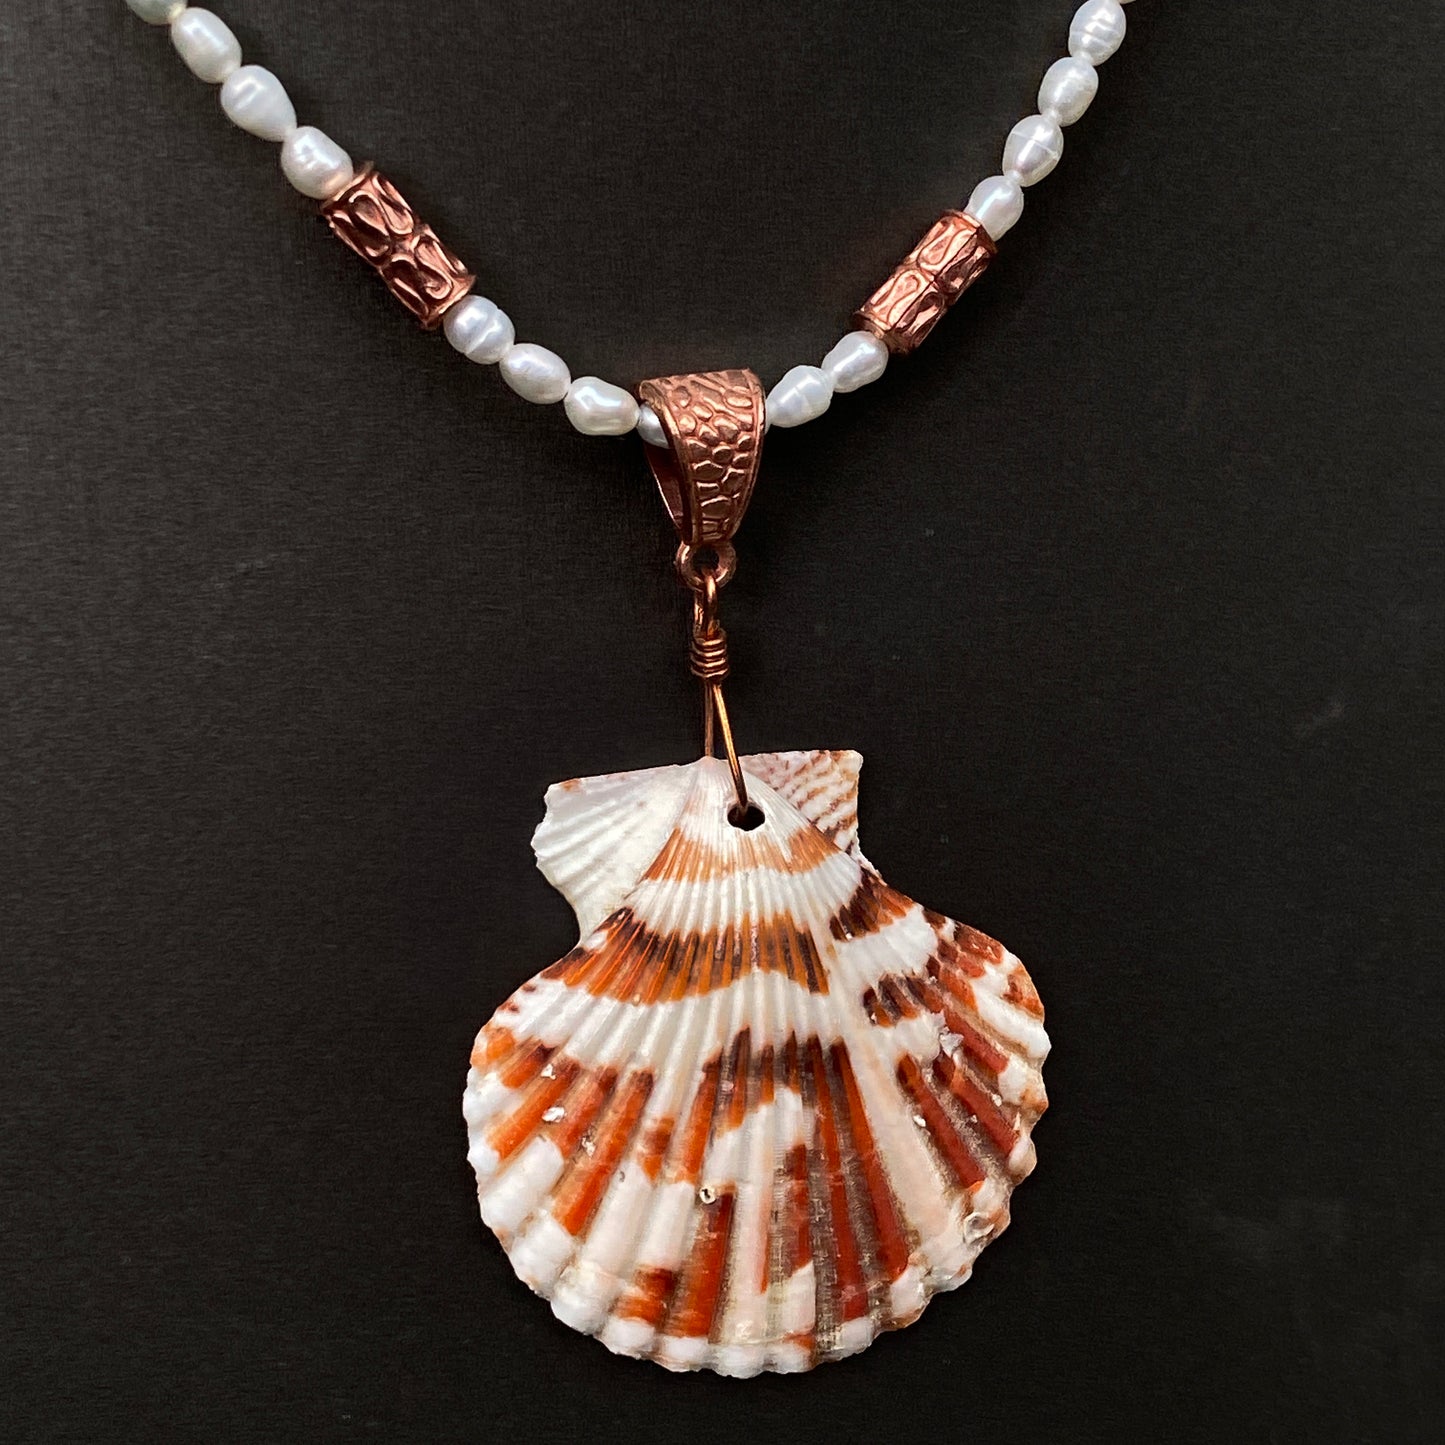 Beaded Pearl Necklace with Shell Pendant